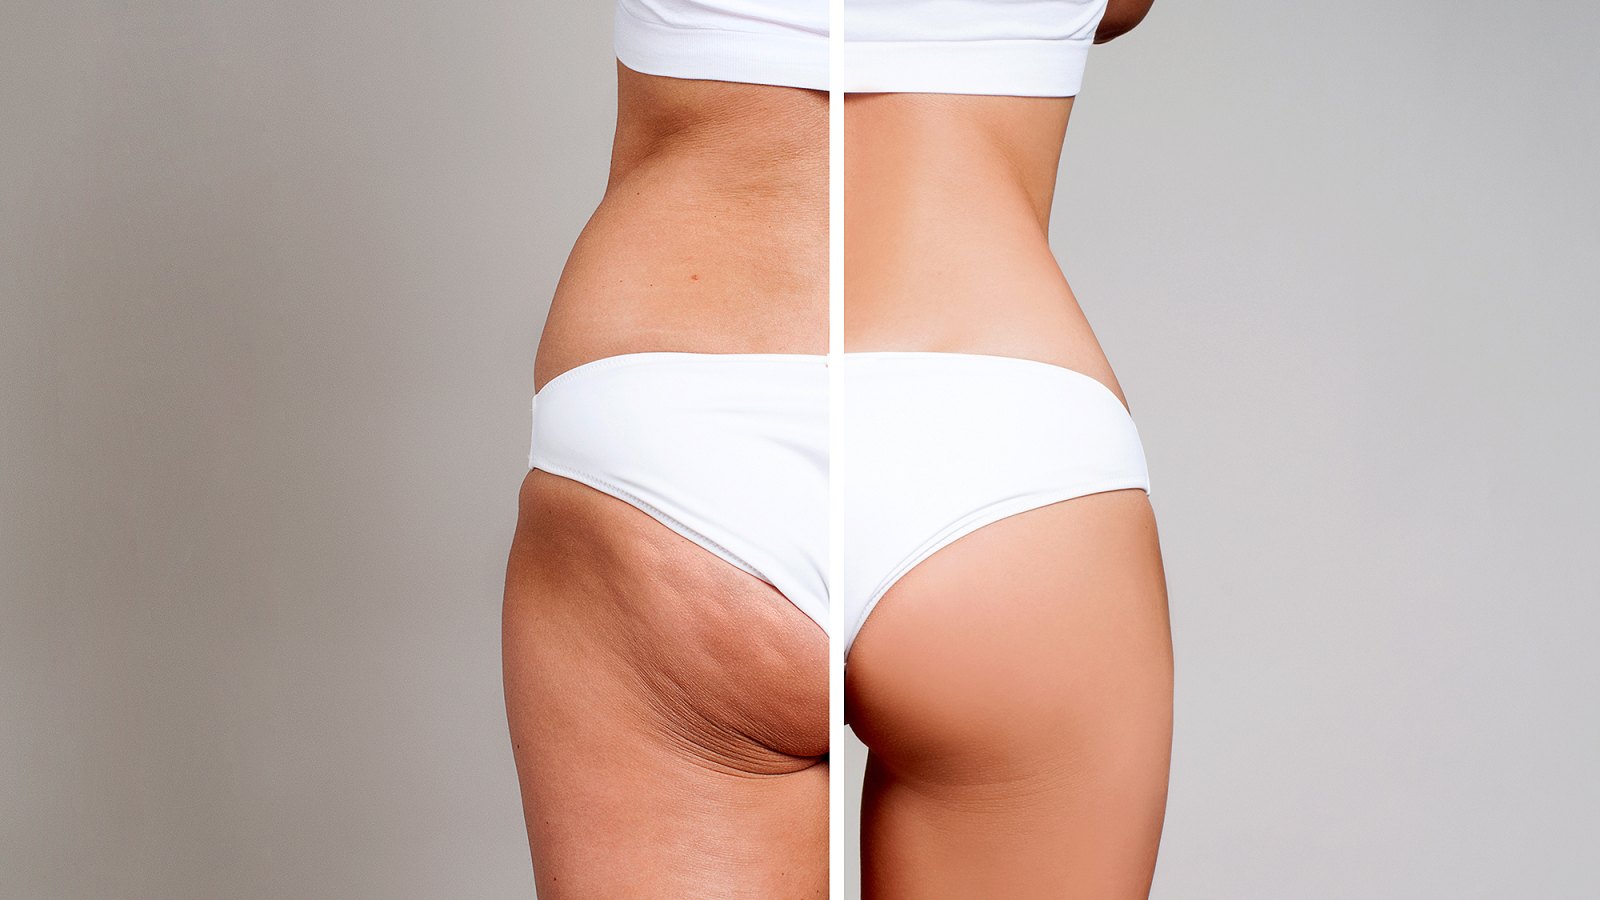 Shapewear That Can Help Fight Cellulite?